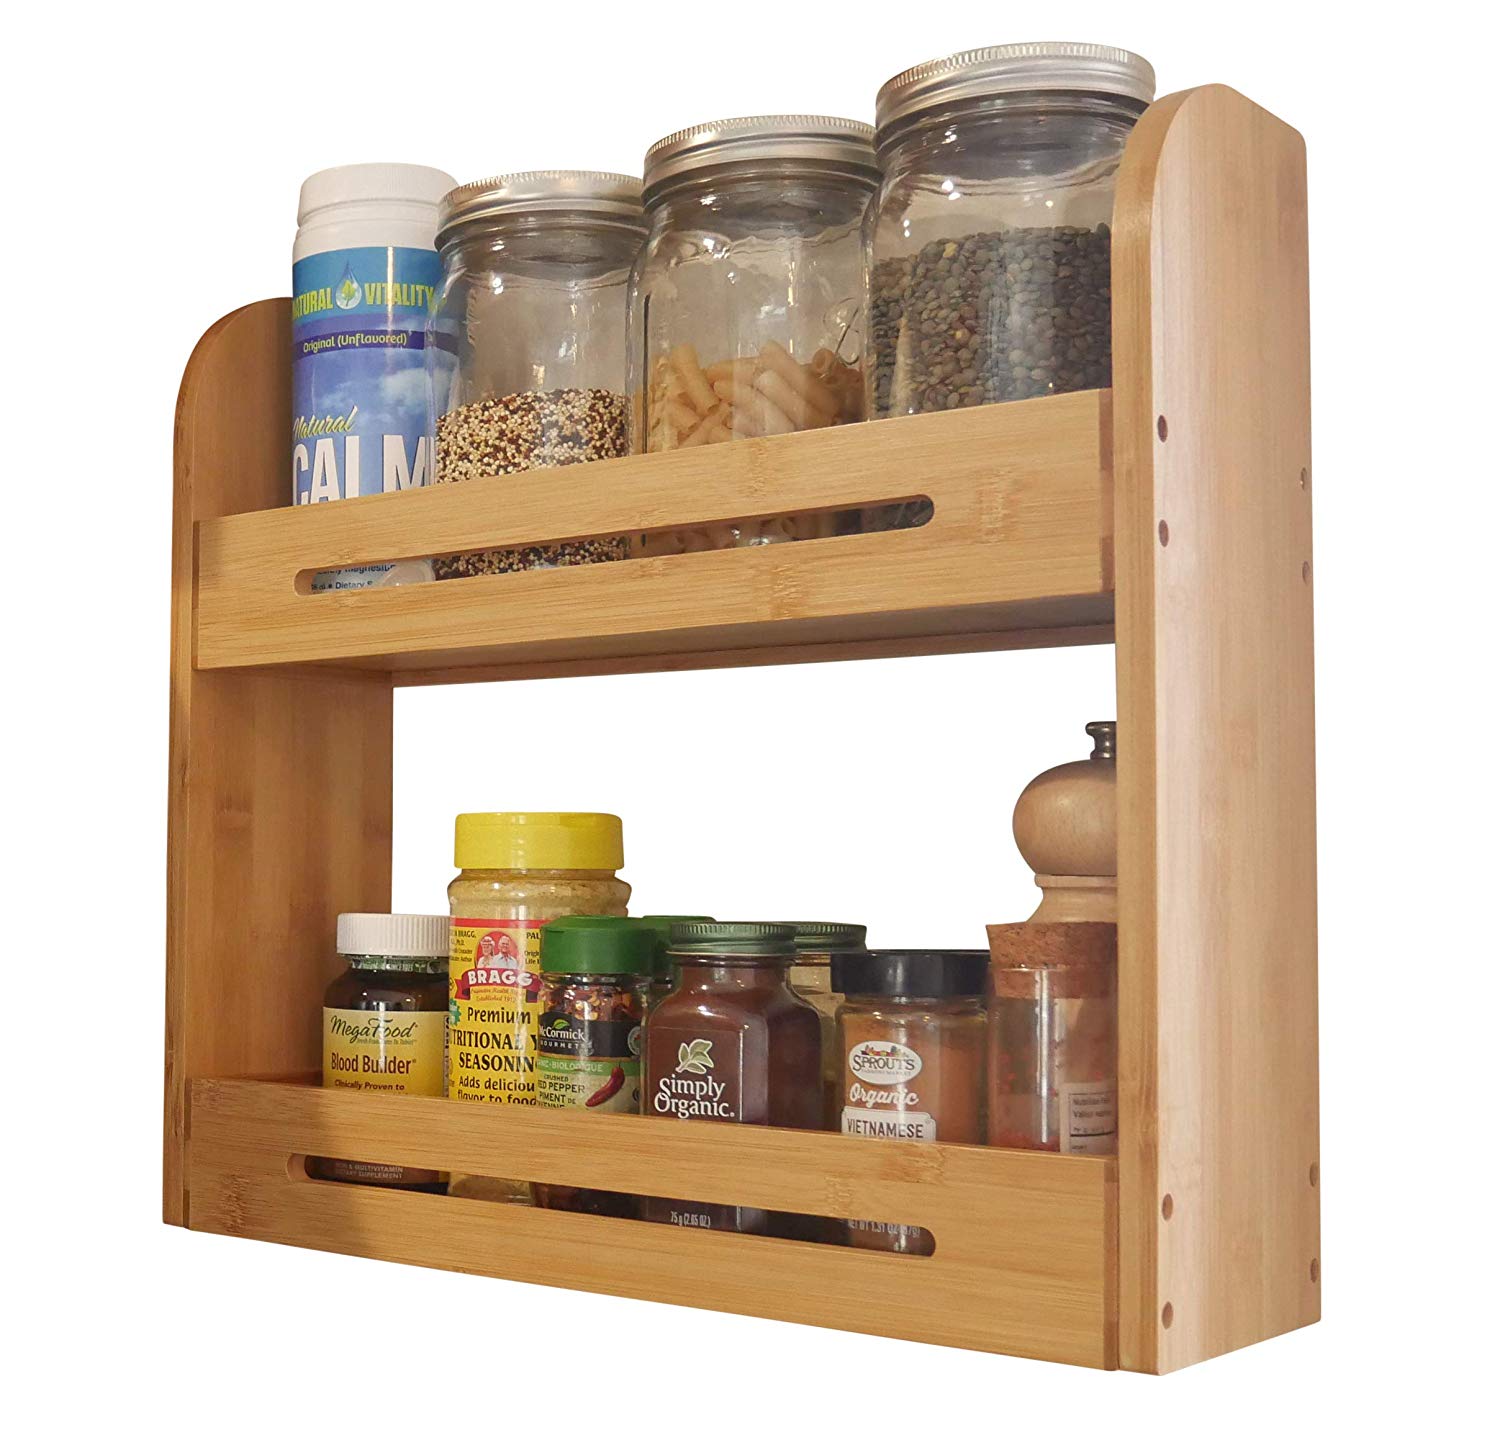 Large Bamboo Spice Rack Stand Two Tiered Wooden Shelf Organizer For Counter Top and Wall Mounted Use | 4 Inch Deep Shelves Fits All Big Sized Bottles Of Spices | Ayurvedic Herbs eBook Included